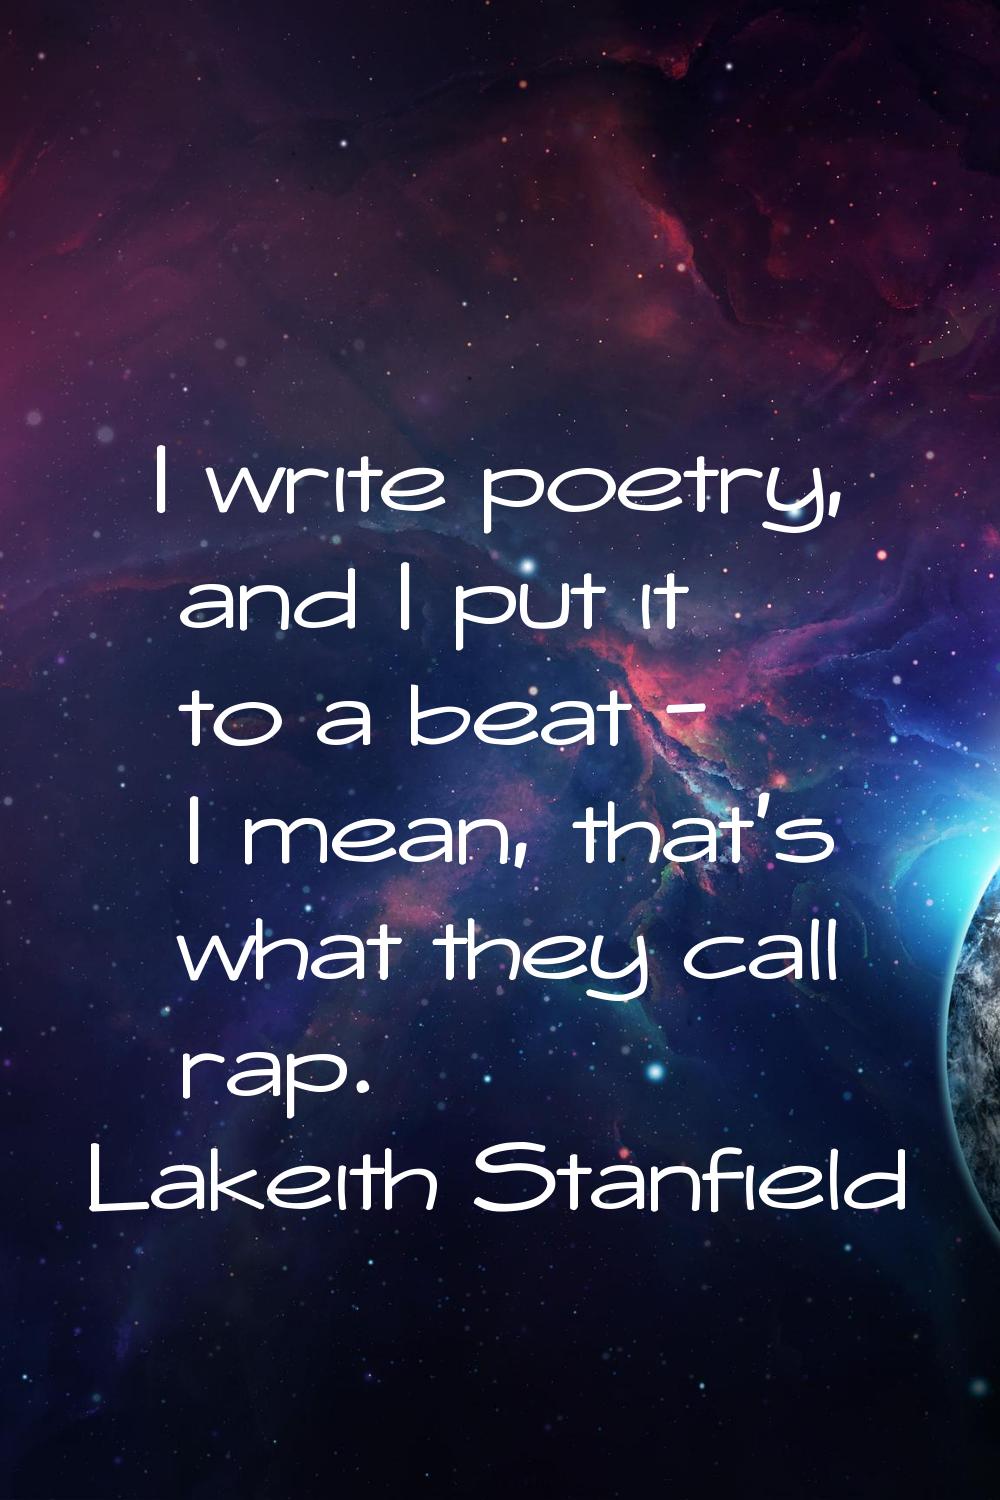 I write poetry, and I put it to a beat - I mean, that's what they call rap.